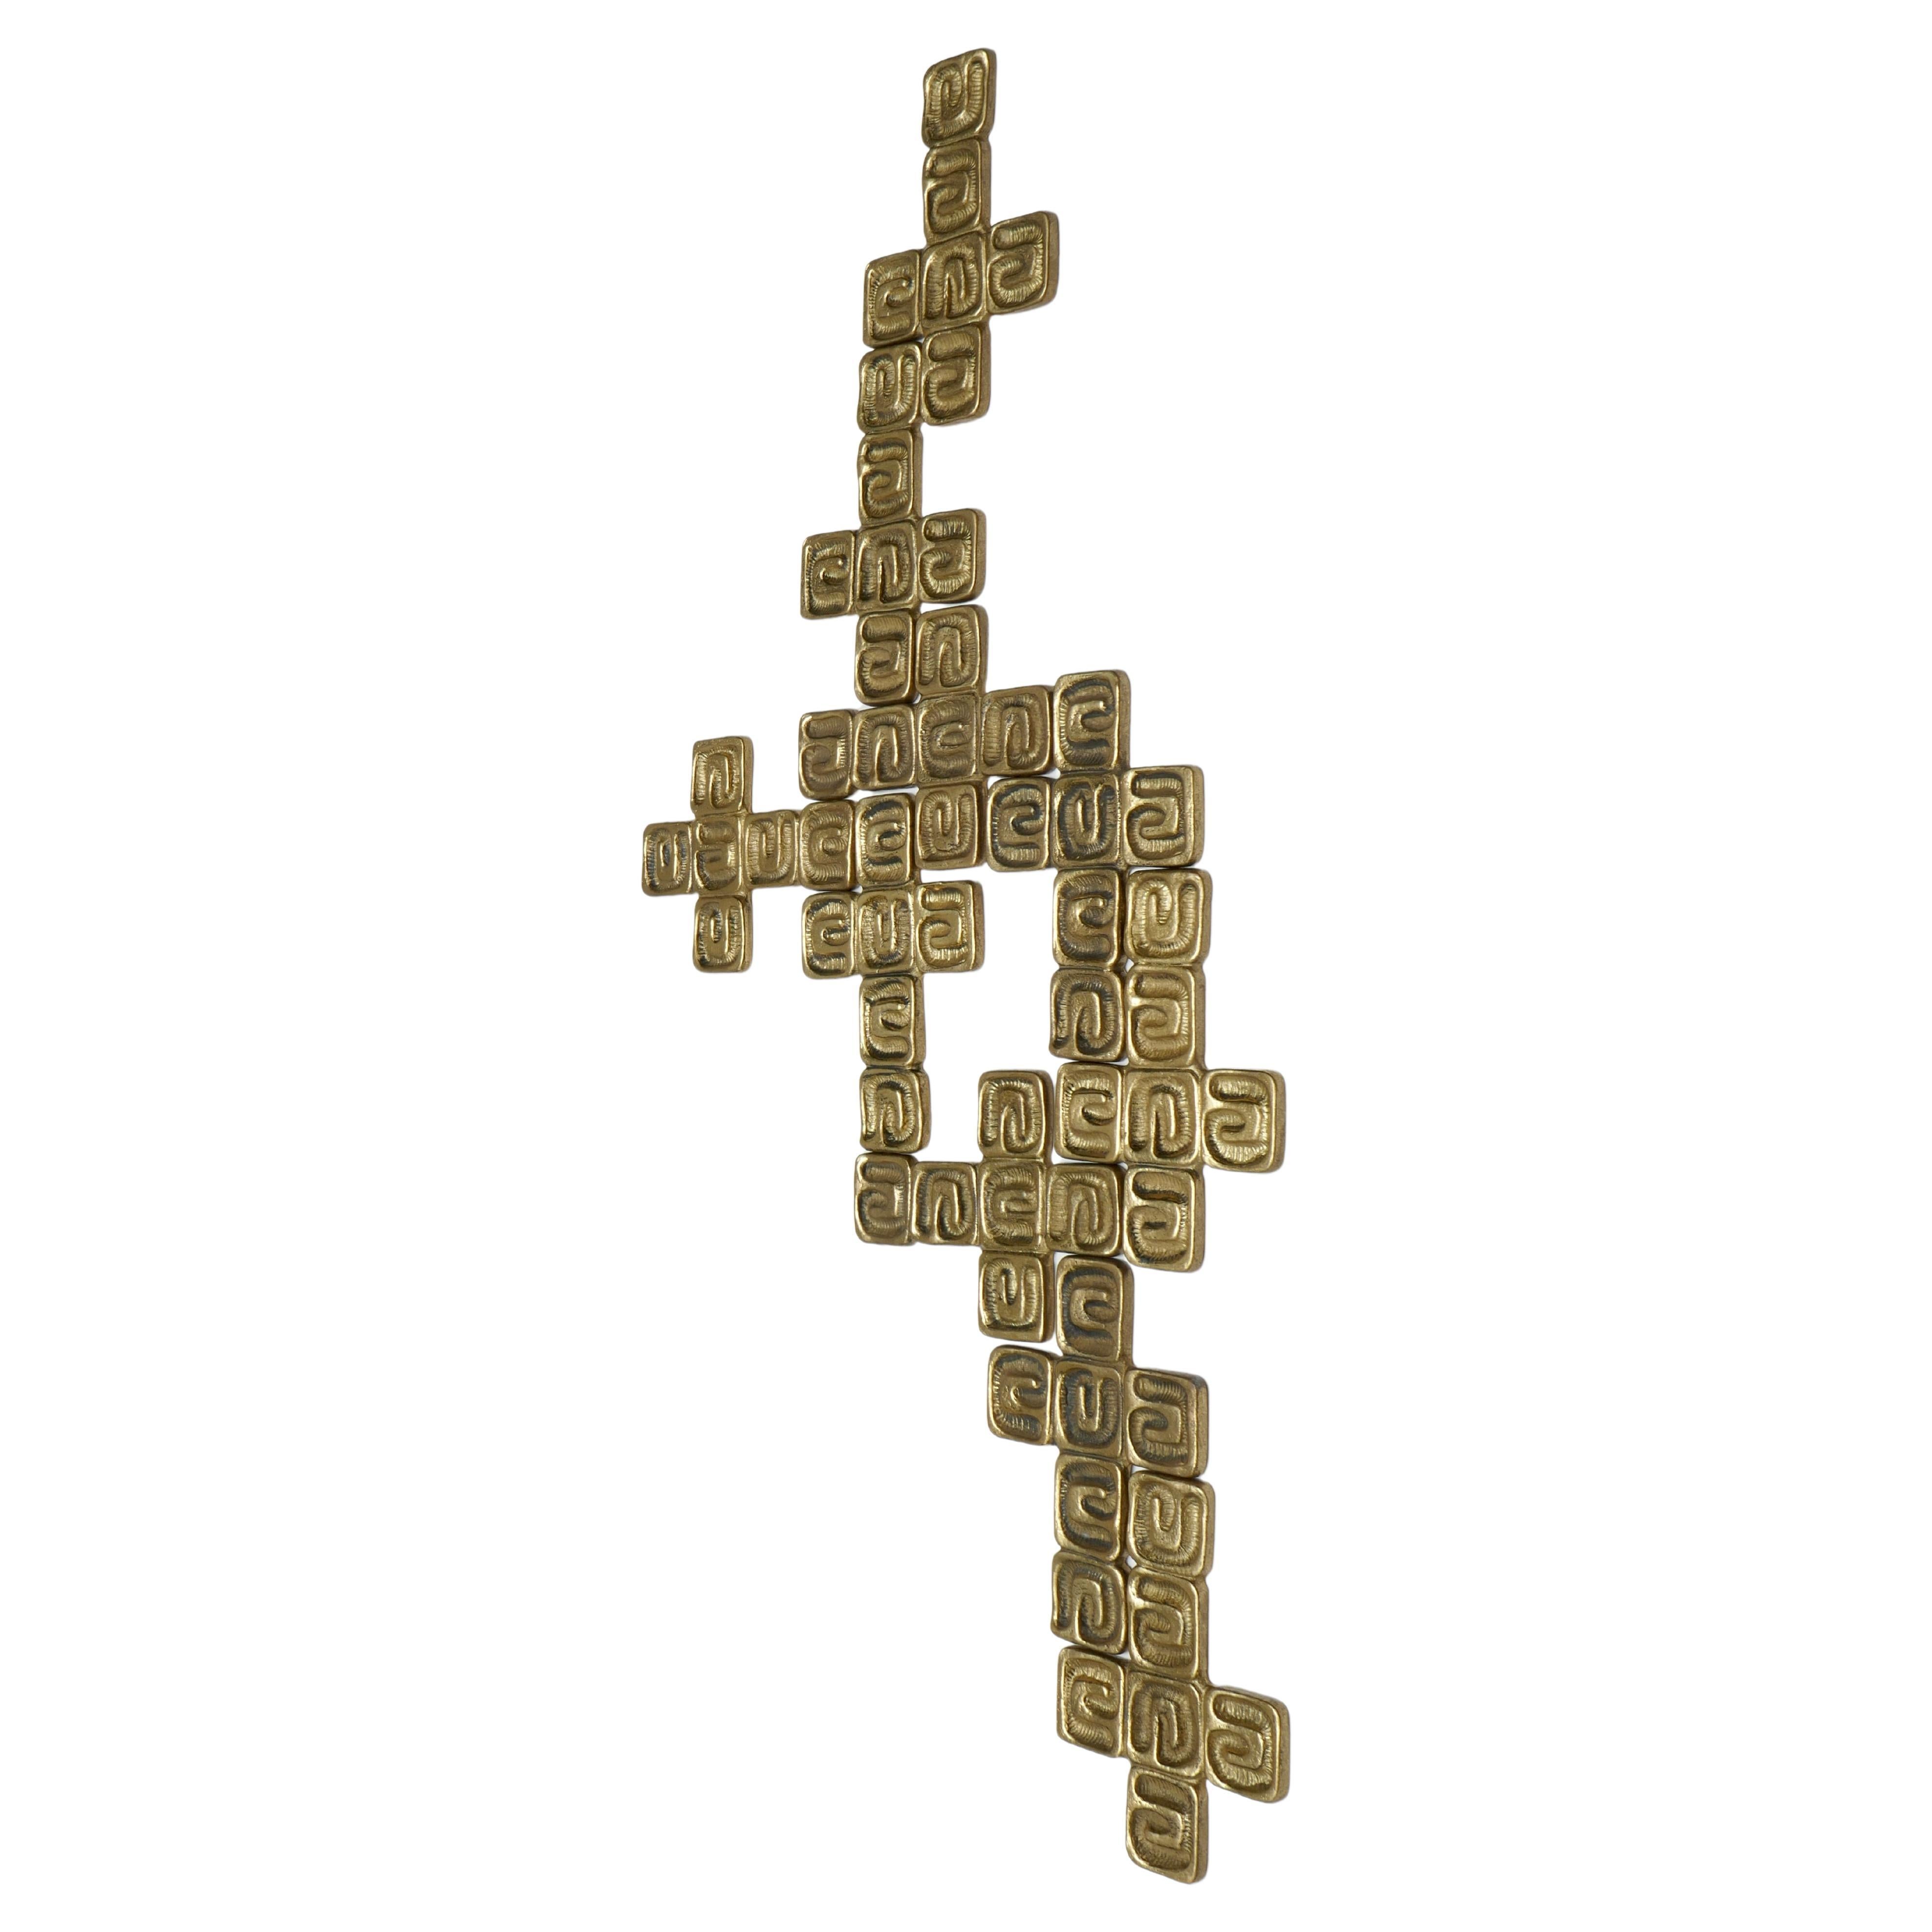 Set of 10 Sculptures by Luciano Frigerio from the 1970s each representing a chiselled brass crucifix. A modular sculpture which can be hung on a wall. You can create your own pattern to adapt it to your space and taste.
You can see a reference to